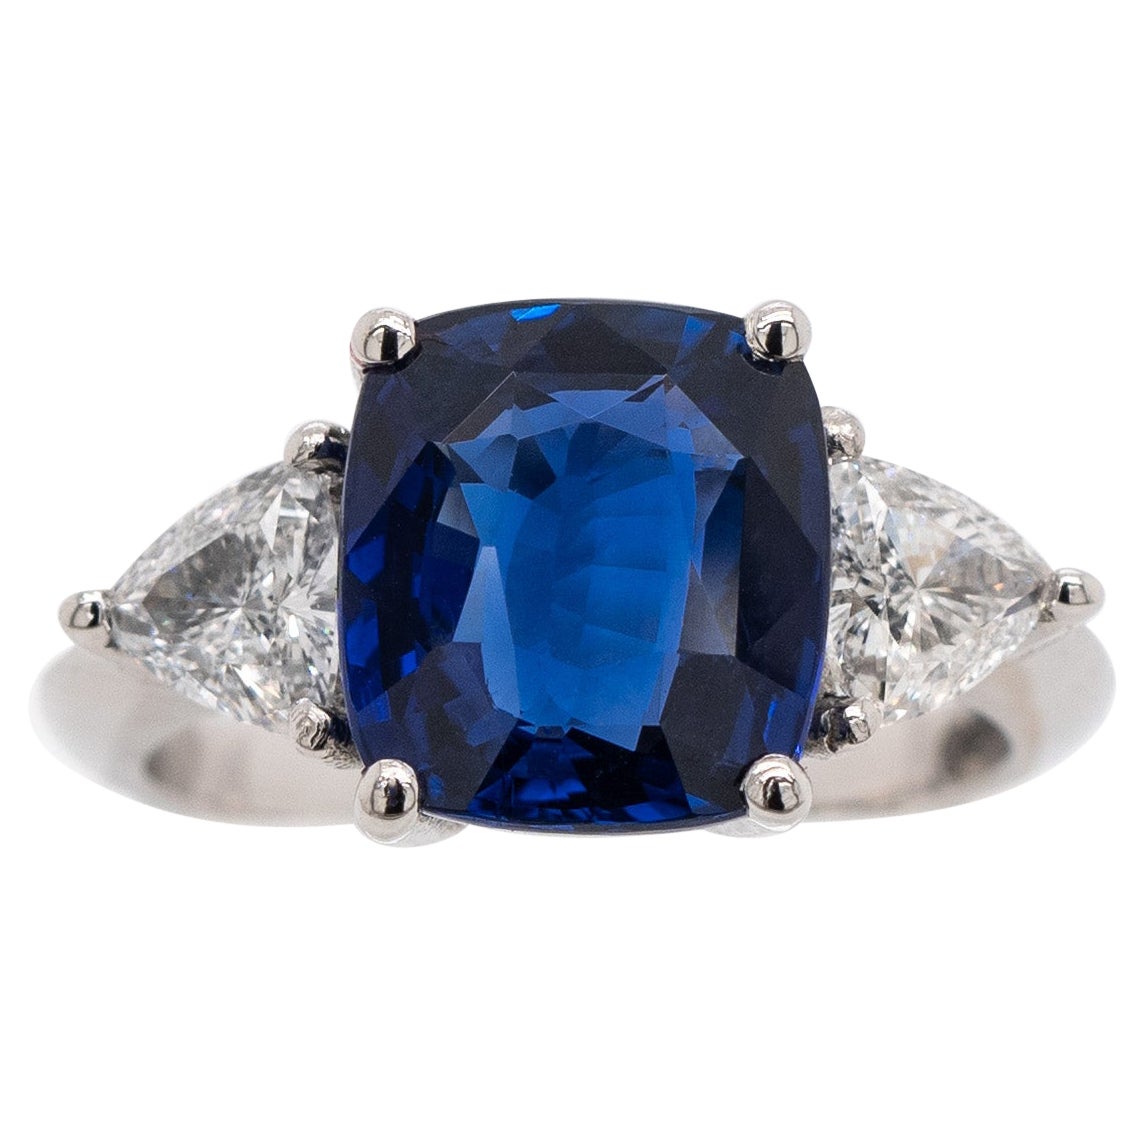 Material: Platinum
Ring Size: K 1/2
Total Ring Weight: 6.9g
Sapphire Weight: 4.05ct
Rubellite Shape: Rectangular Cushion Brilliant Mixed
Sapphire Colour: Royal Blue
Total Diamond Weight: 1.34ct (2x0.67ct)
Diamond Shape: Trillion
Diamond